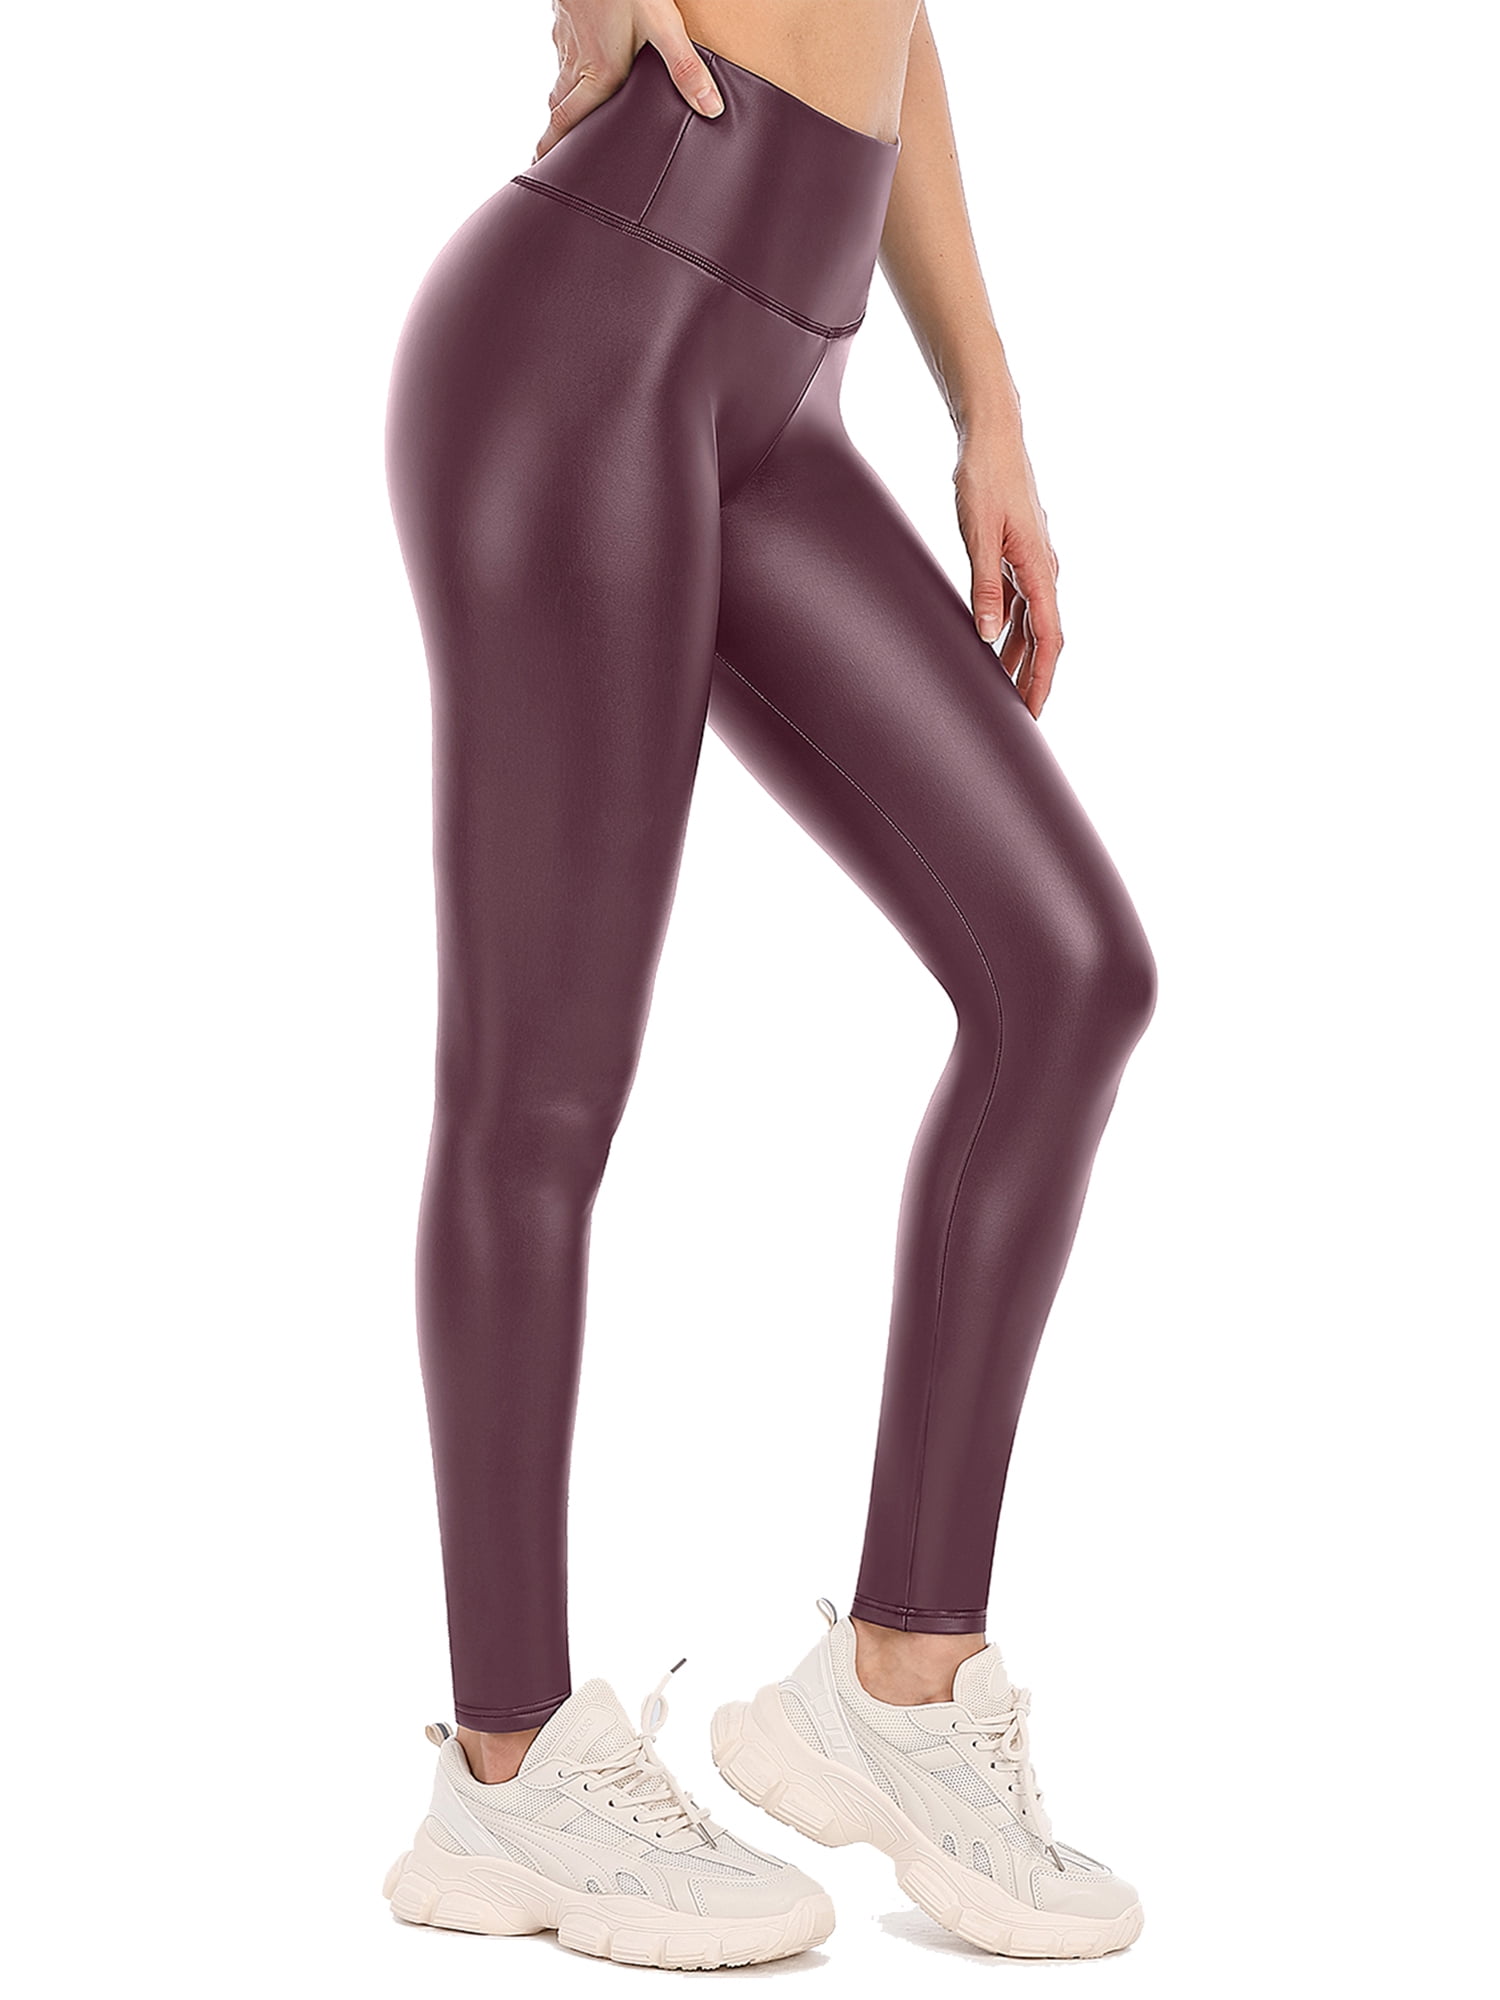 Women's High Waisted Faux Leather Leggings Stretch Pleather Pants